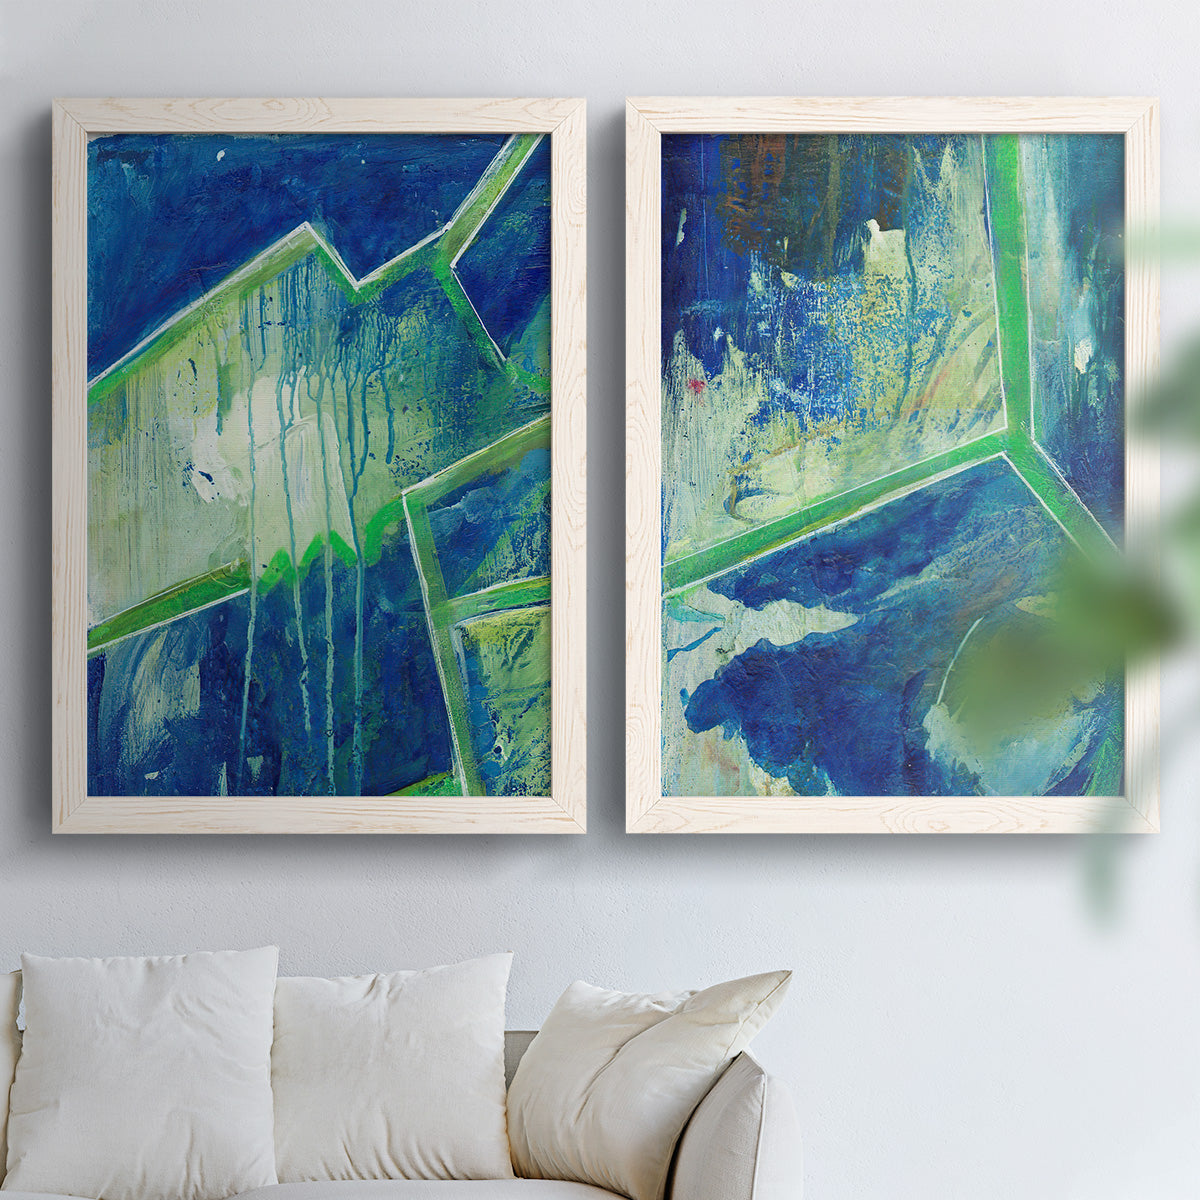 Geometric in Cool V - Premium Framed Canvas 2 Piece Set - Ready to Hang